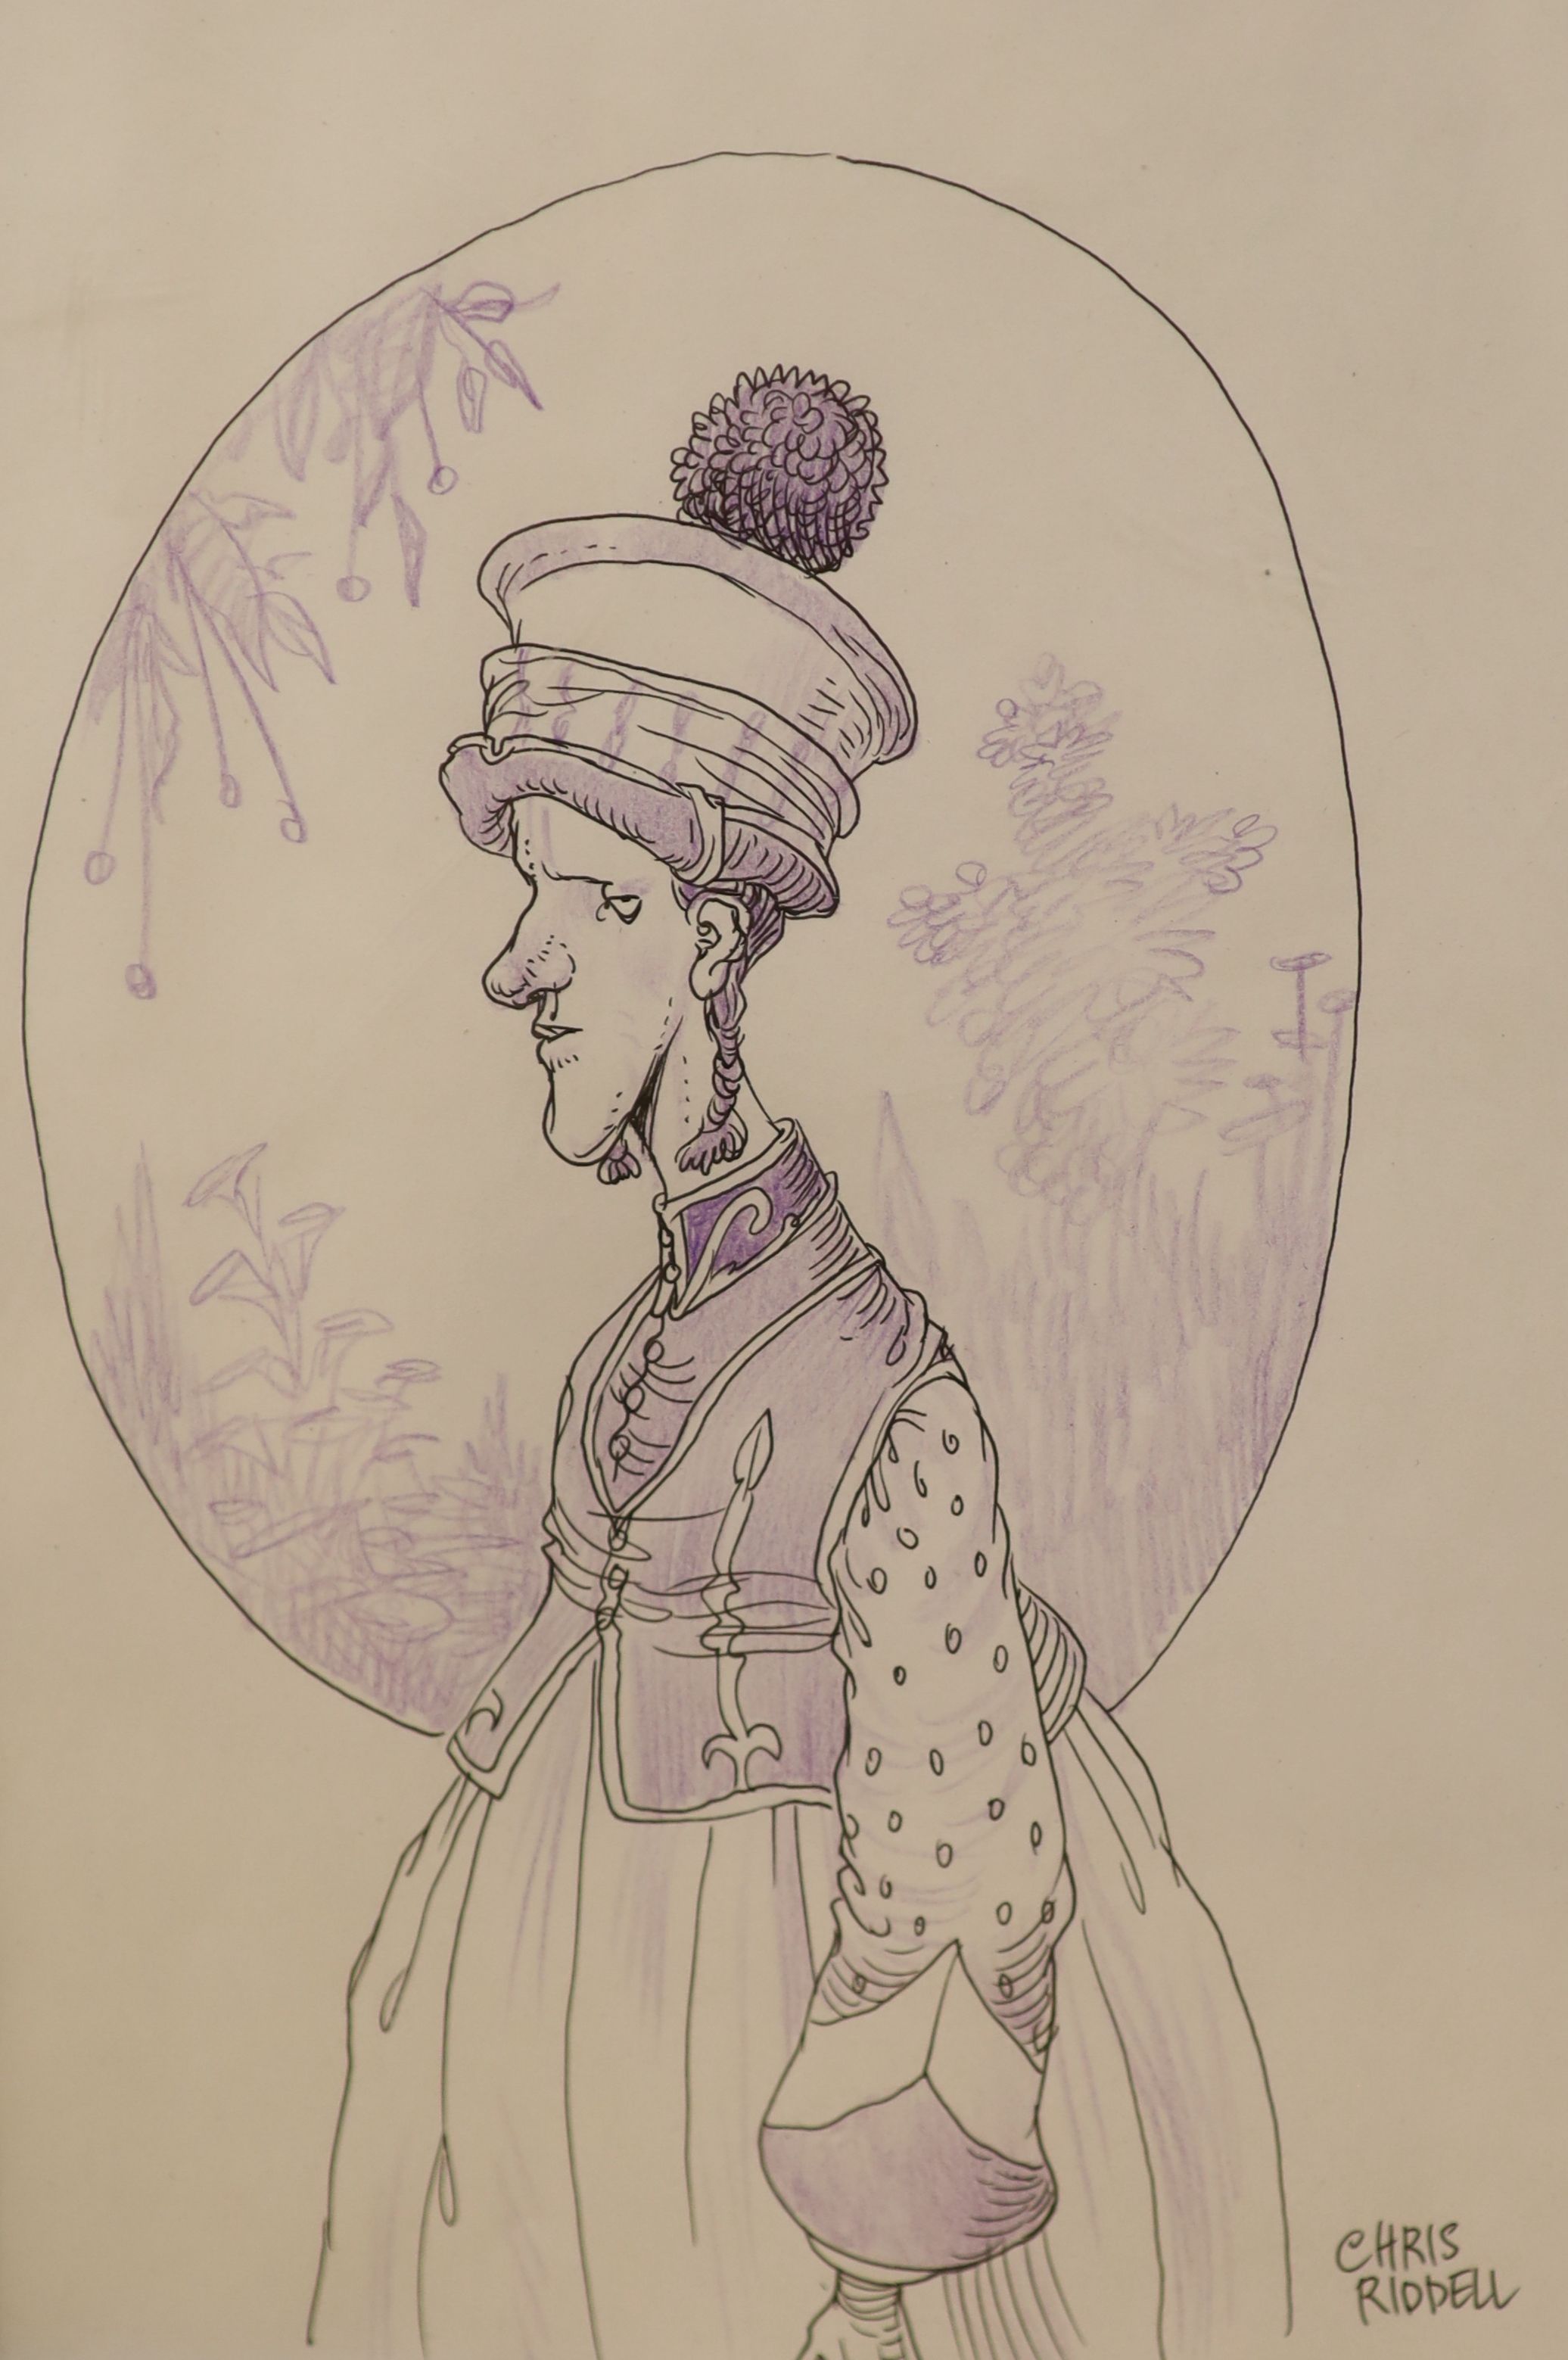 Christopher Riddell (1962-), ink and coloured pencil, Despondent Monarch, signed, 29 x 20cm